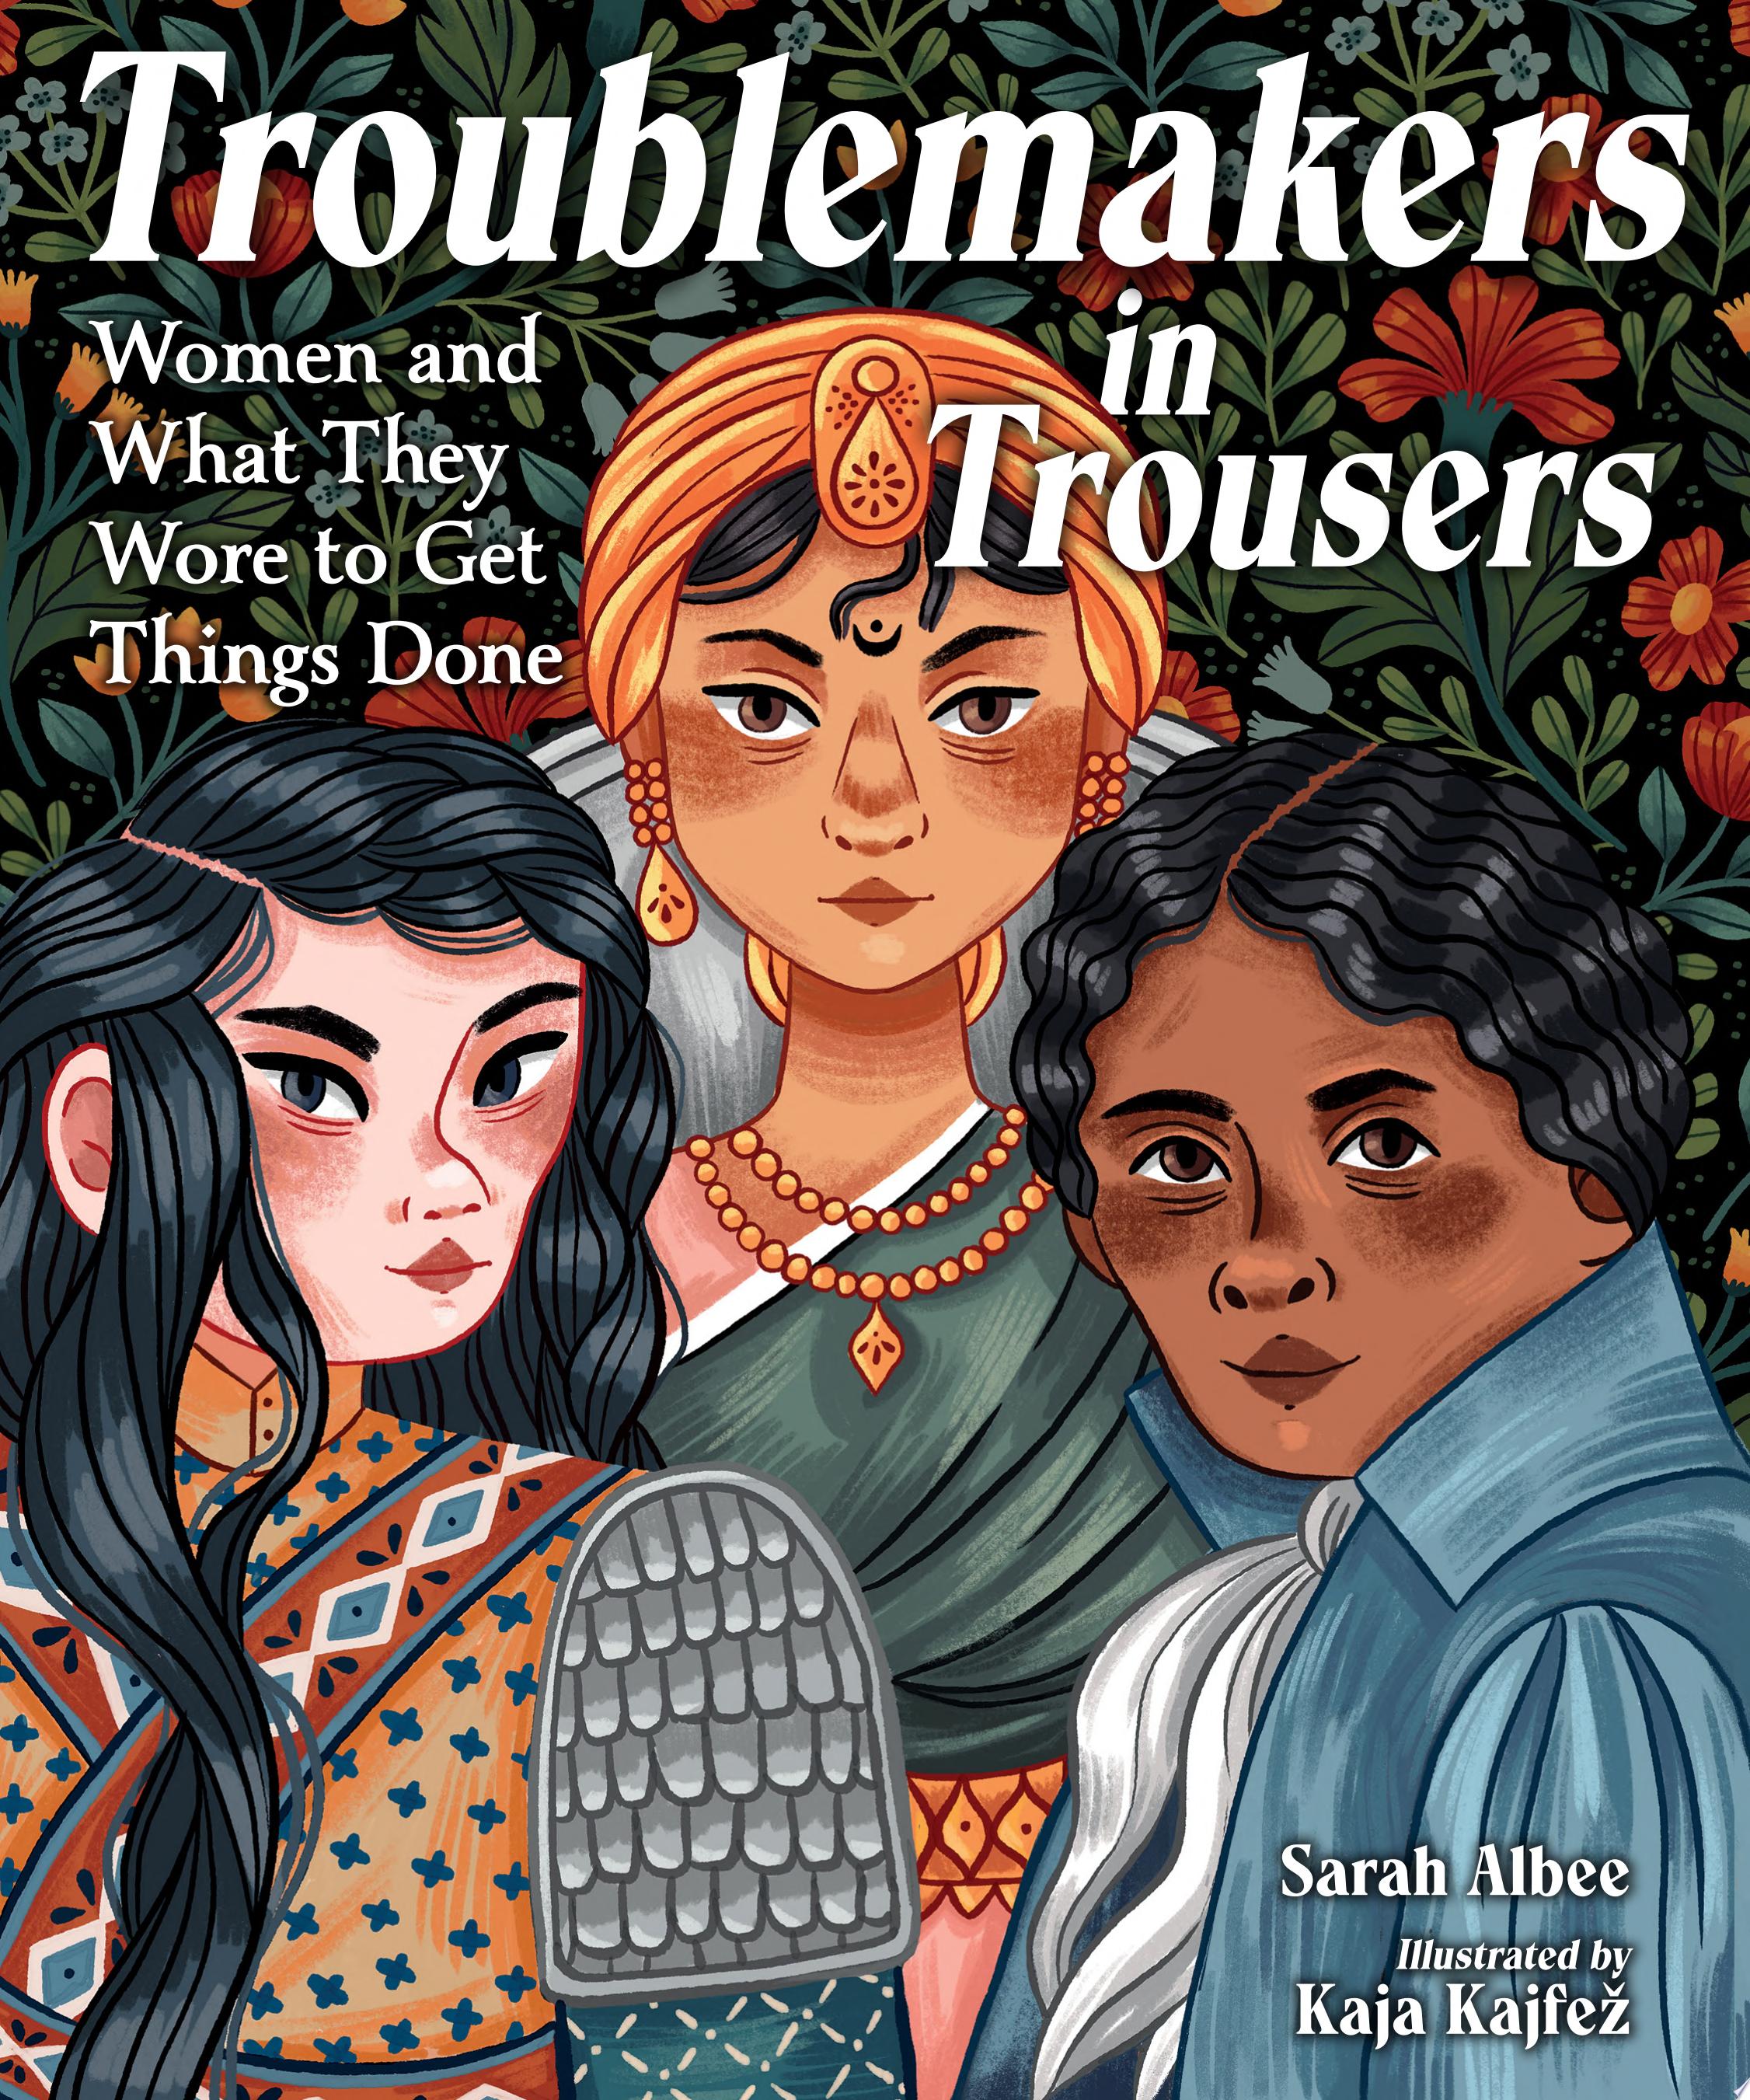 Image for "Troublemakers in Trousers"